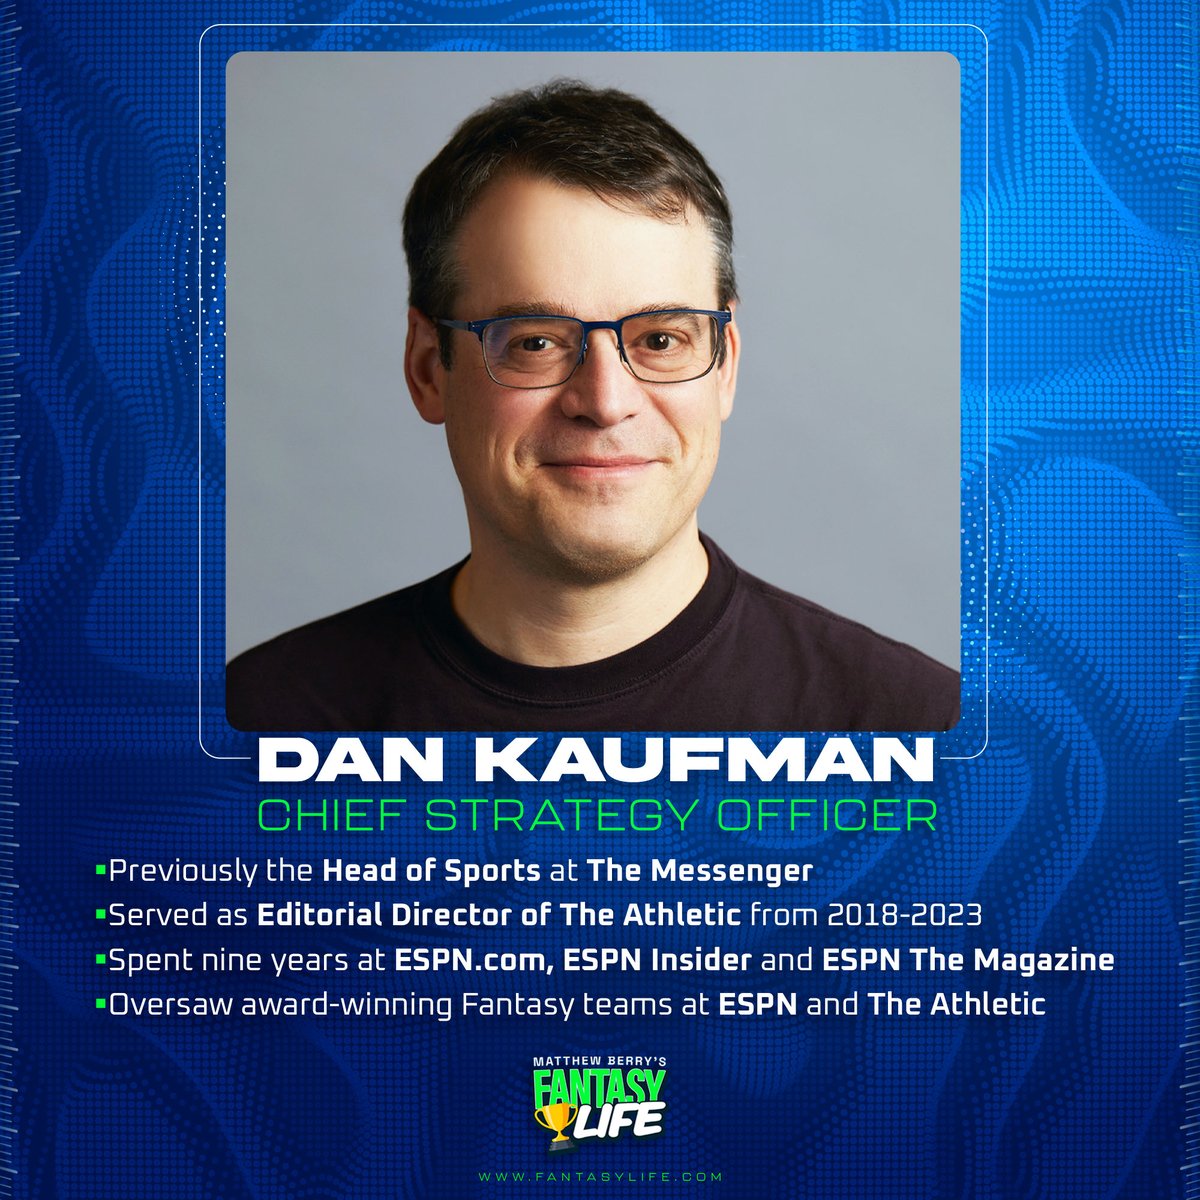 We are excited to announce Dan Kaufman as Fantasy Life's new Chief Strategy Officer! Dan has previously worked for The Messenger, The Athletic and ESPN. We are thrilled to have him joining our team.